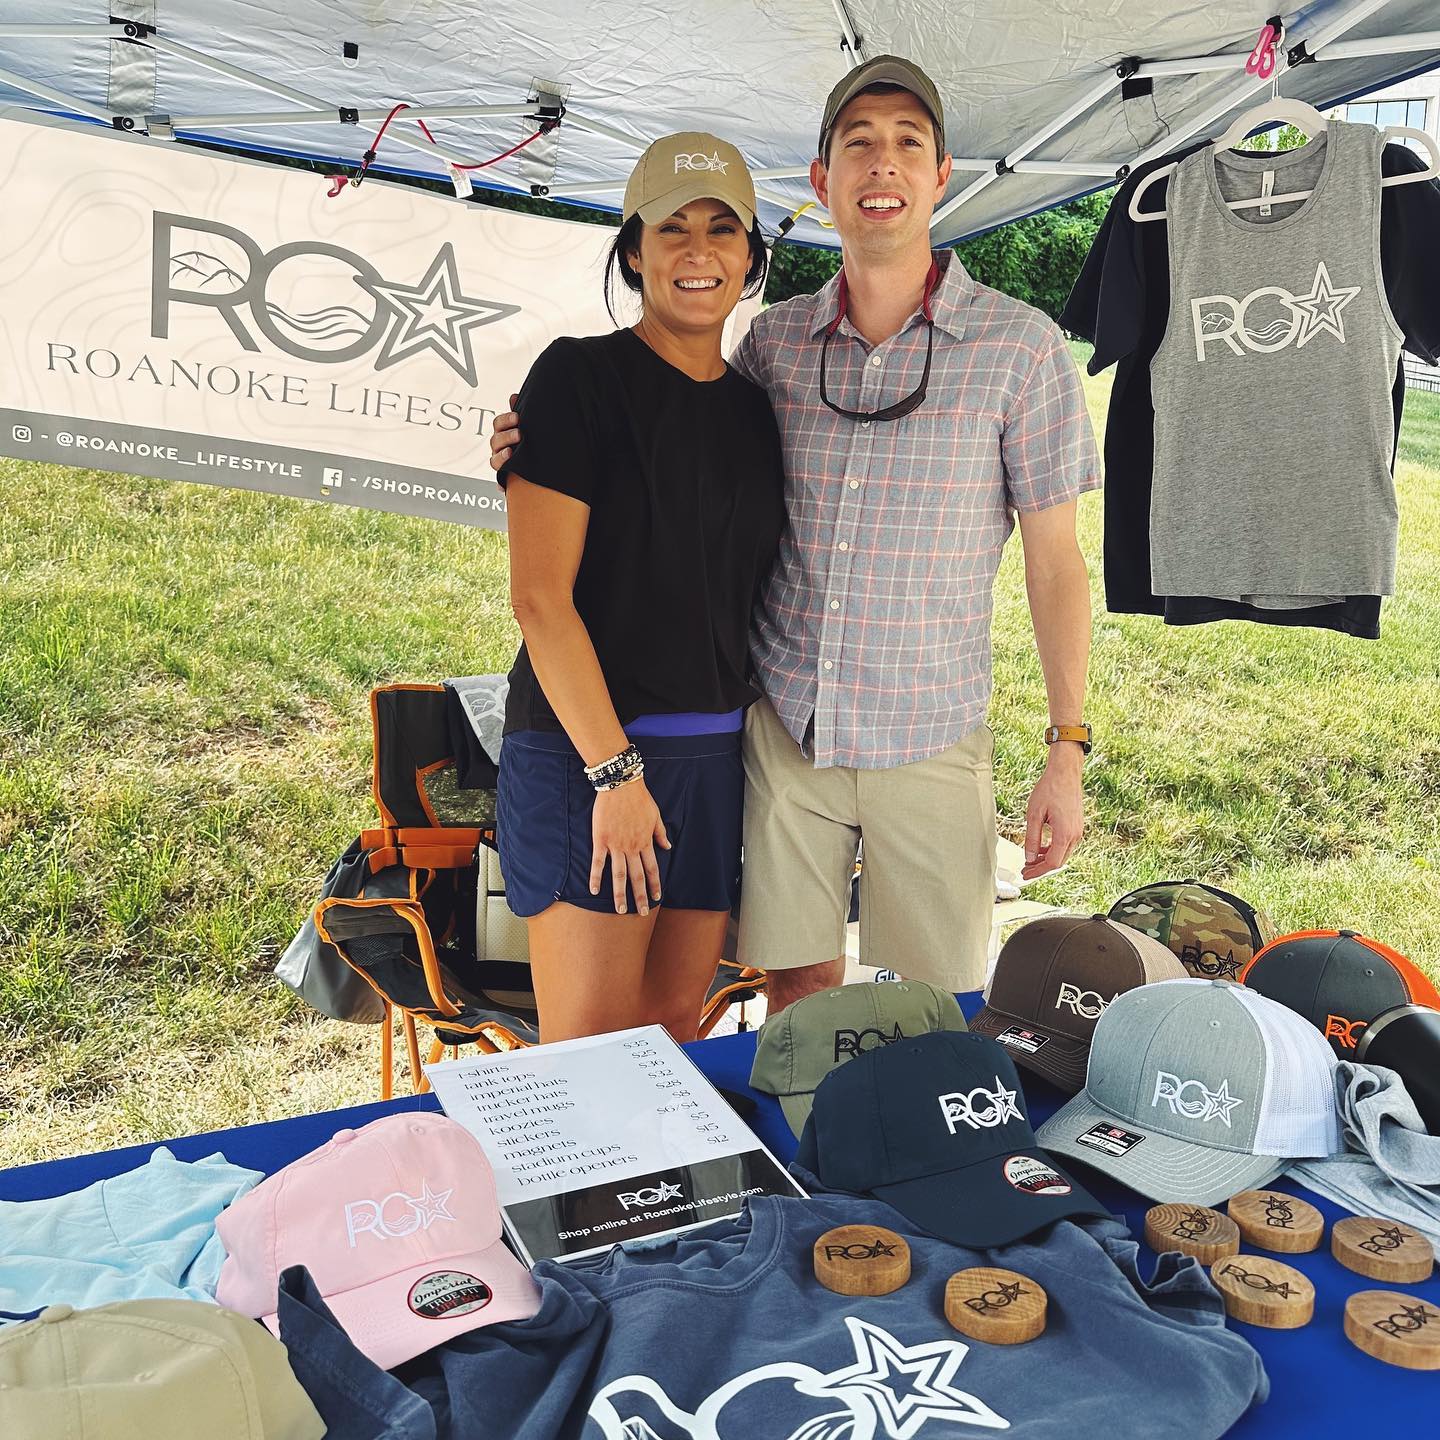 Roanoke Lifestyle Showcases Love for the Outdoors